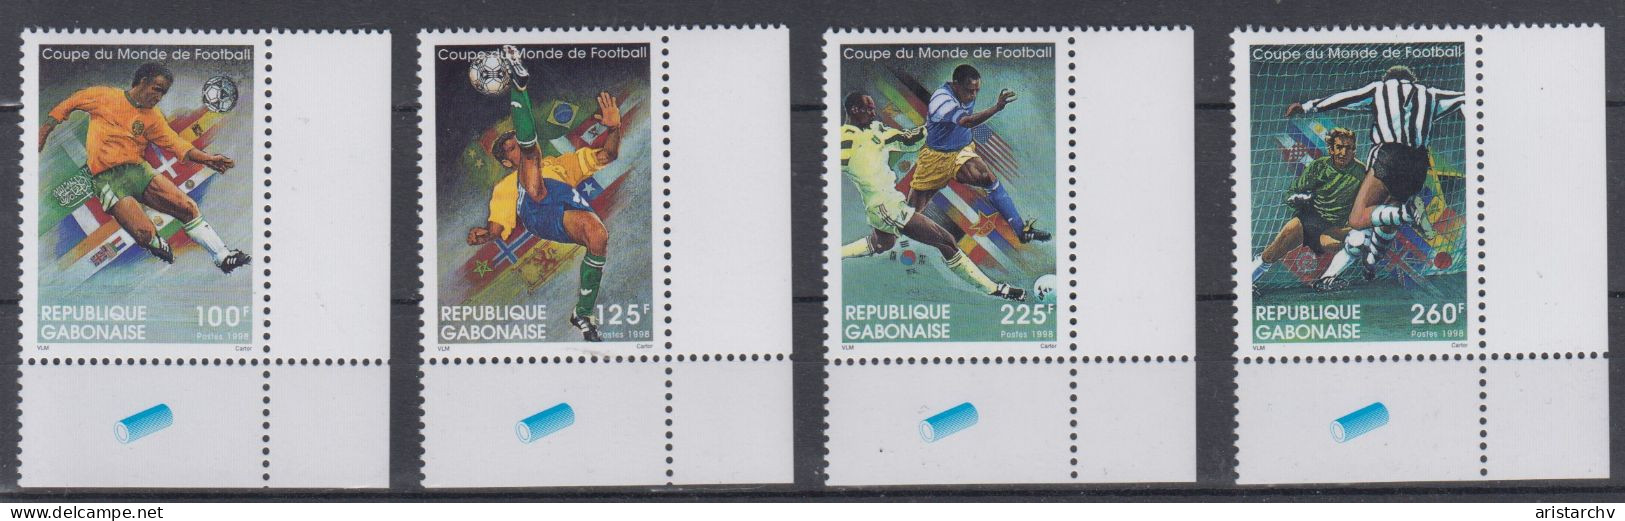 GABON 1998 FOOTBALL WORLD CUP S/SHEET AND 4 STAMPS - 1998 – Frankrijk